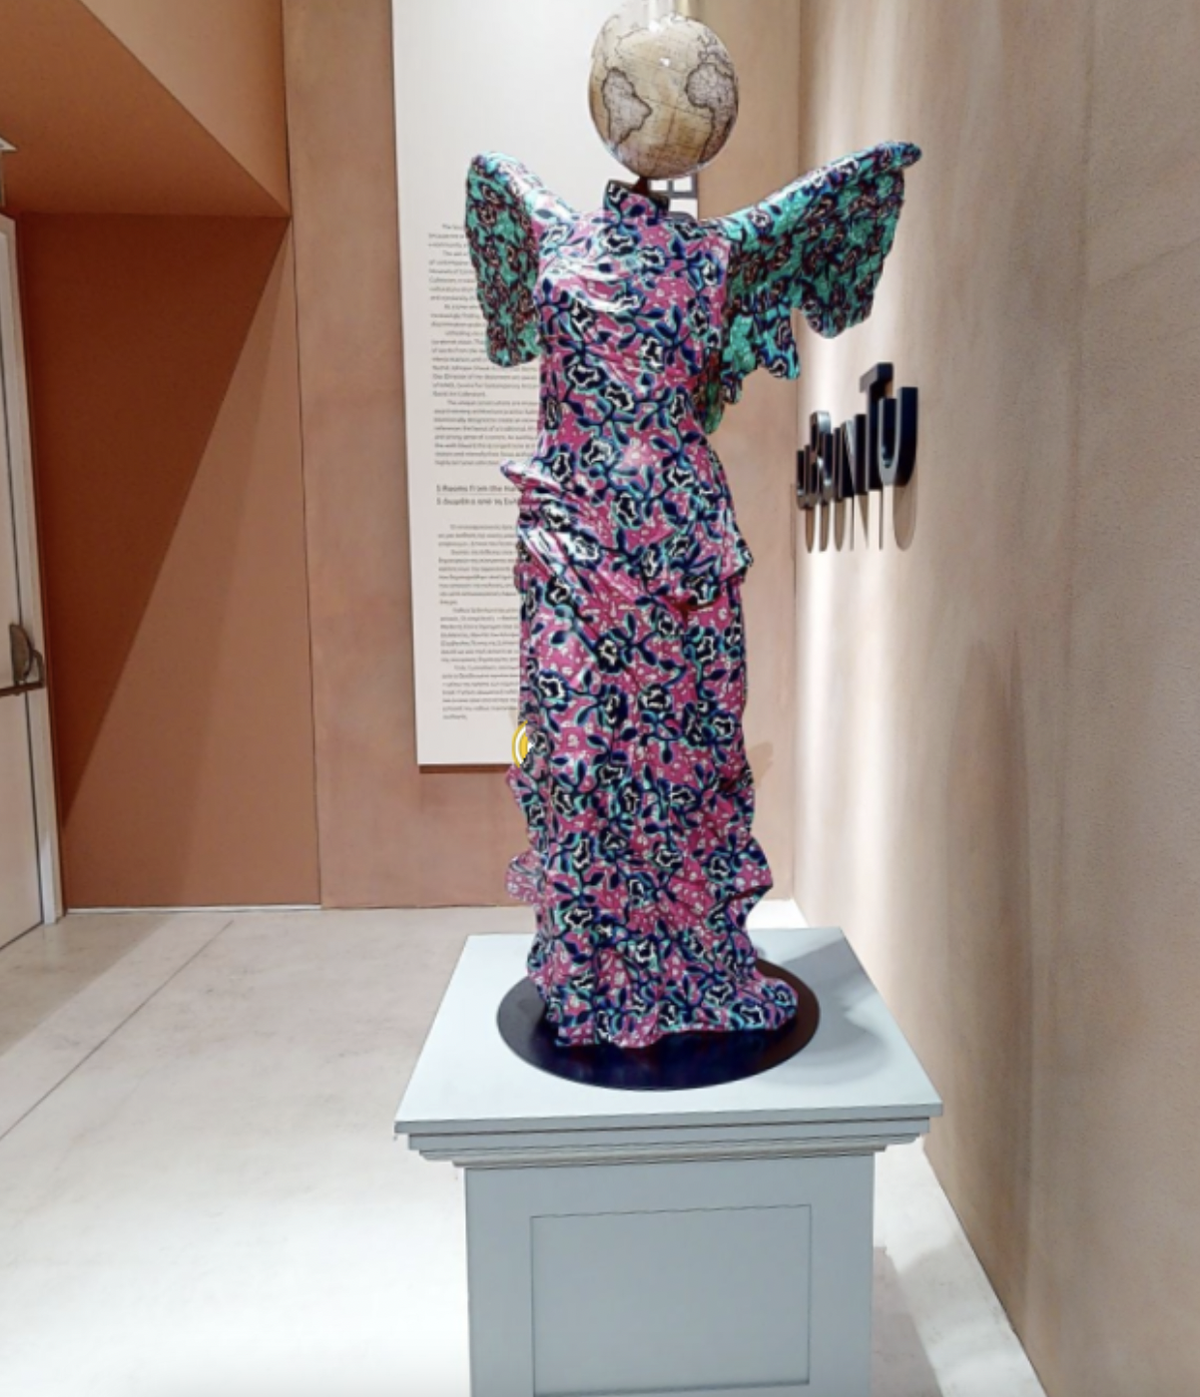 Yinka Shonibare, Winged Victory of Samothrace, 2017.Fibreglass, hand-painted with dutch wax batik pattern and bespoke hand-coloured globe, 142.5 x 87 x 92 cm.Installation view, UBUNTU: Five Rooms at the Harry David Art Collection, National Museum of Contemporary Art Athens (EMST), 2020-2021. Courtesy of the artist and The Harry David Art Collection.